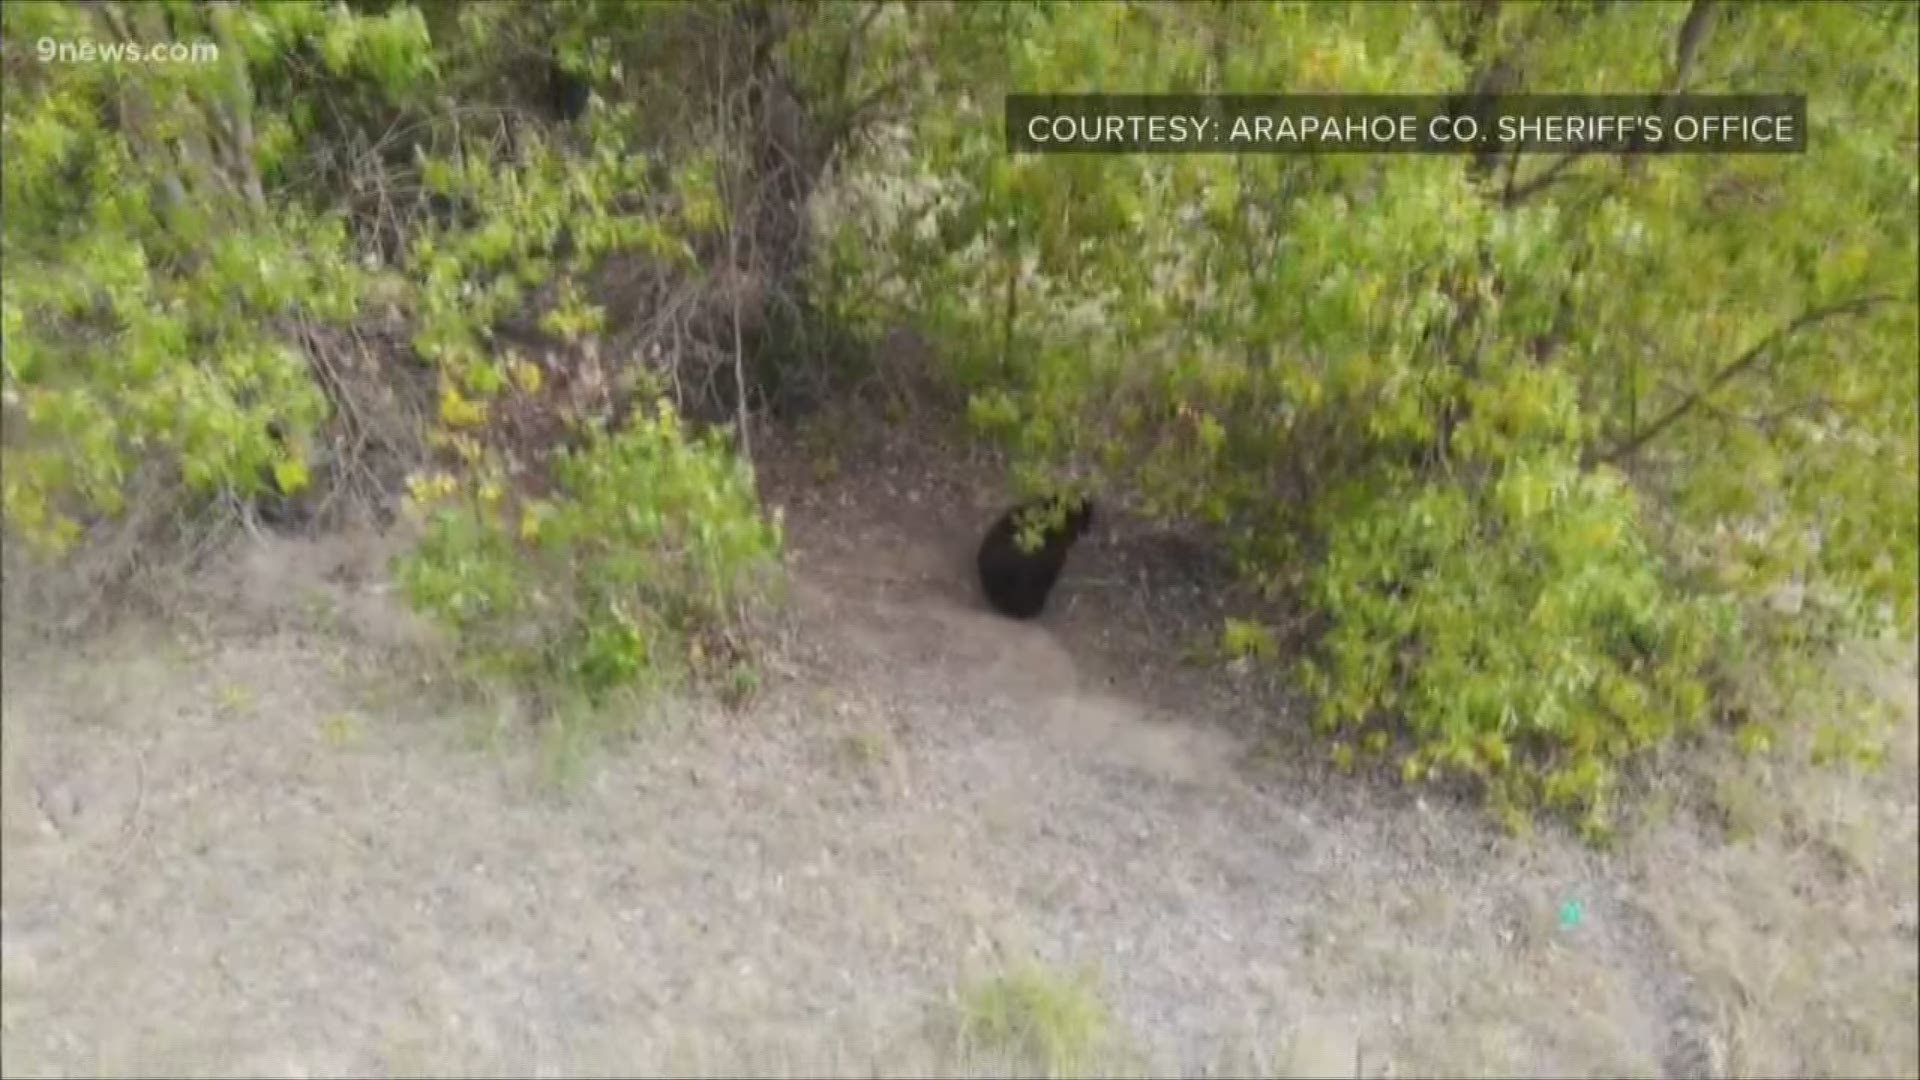 The bear looks happy and healthy, at least according to drone shots.